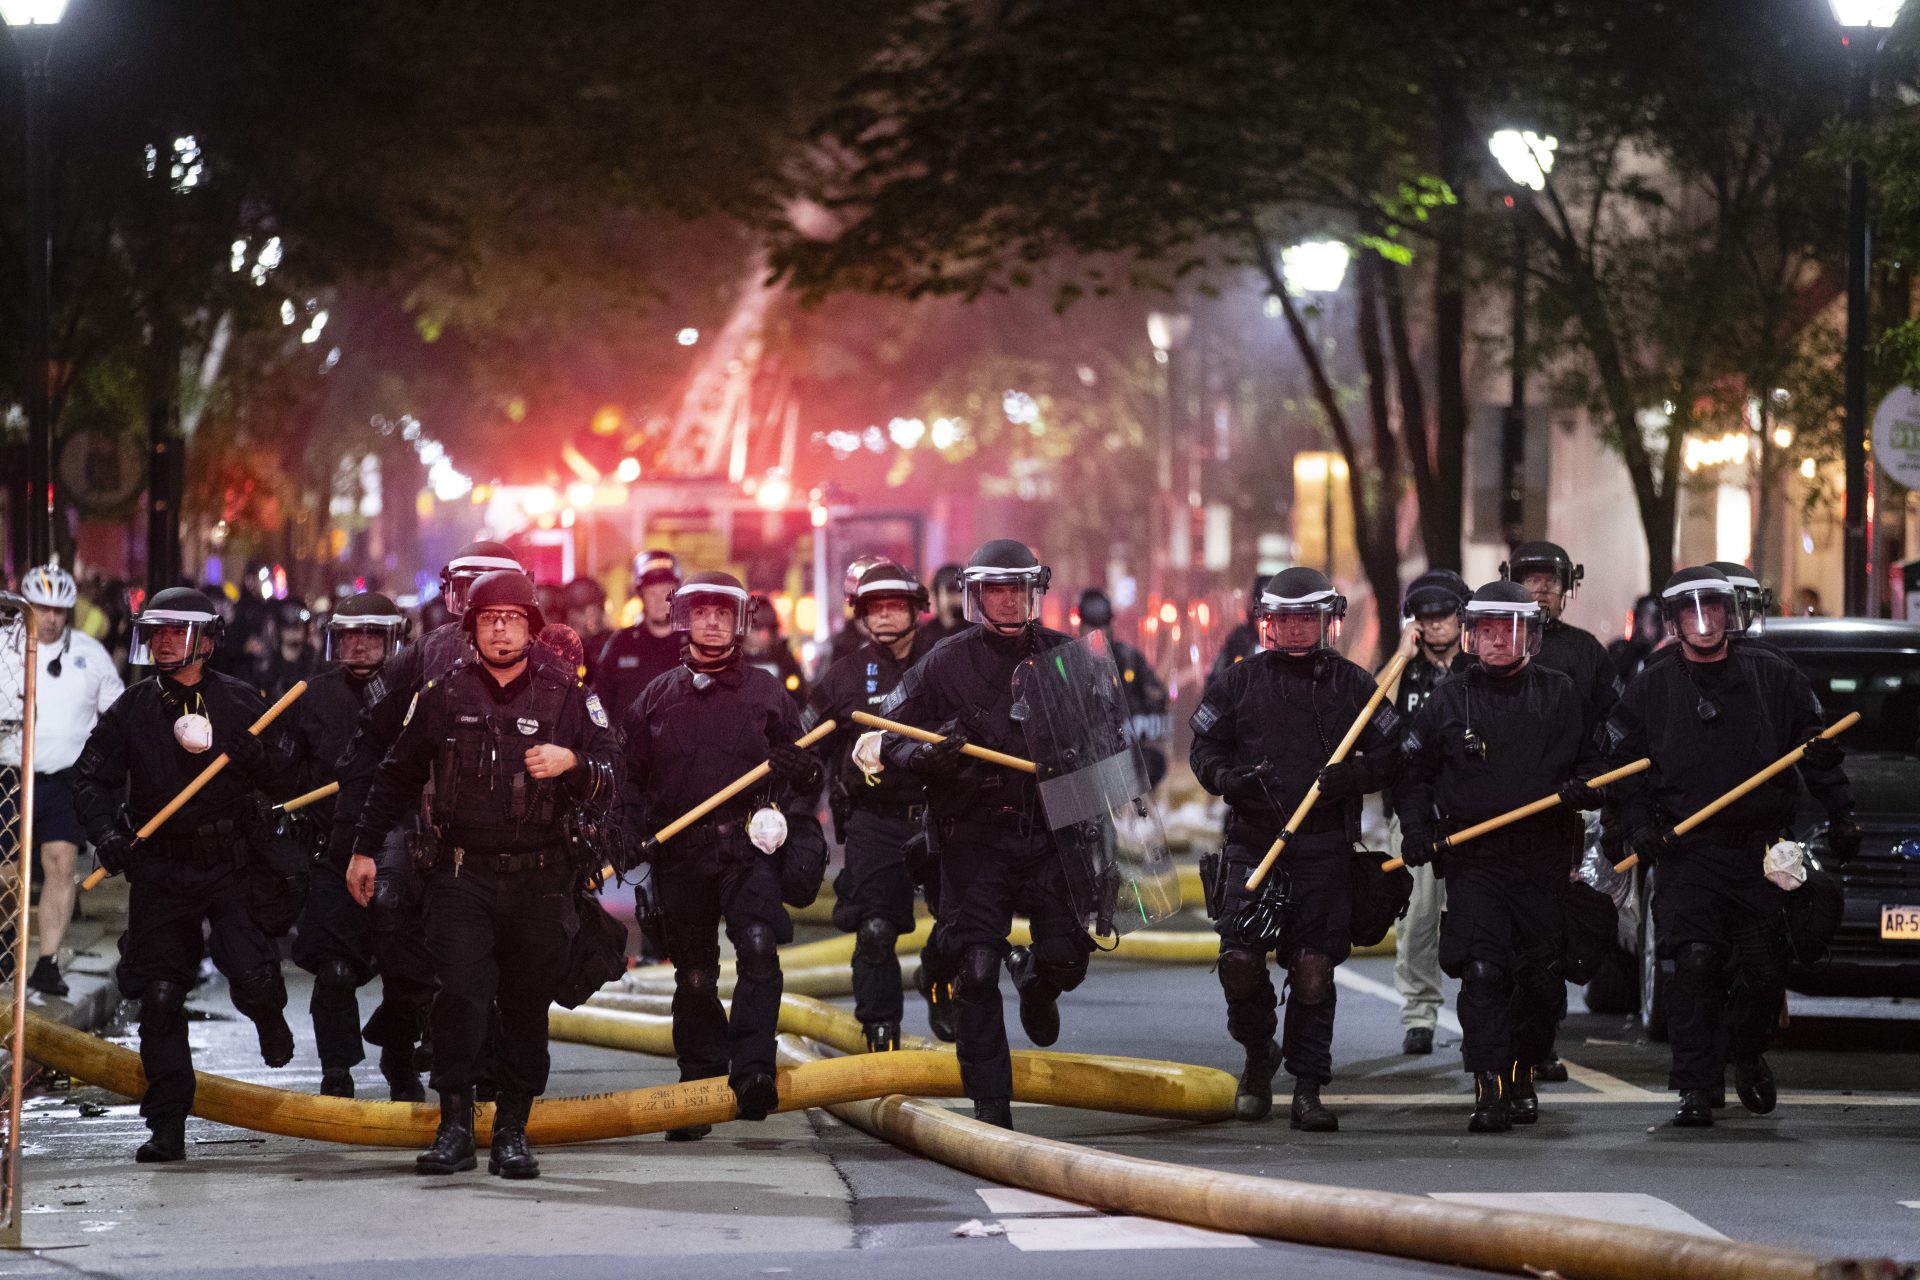 Police push down a street Saturday, May 30, 2020, in Philadelphia, during a protest over the death of George Floyd, a black man who was in police custody in Minneapolis. Floyd died after being restrained by Minneapolis police officers on Memorial Day. (